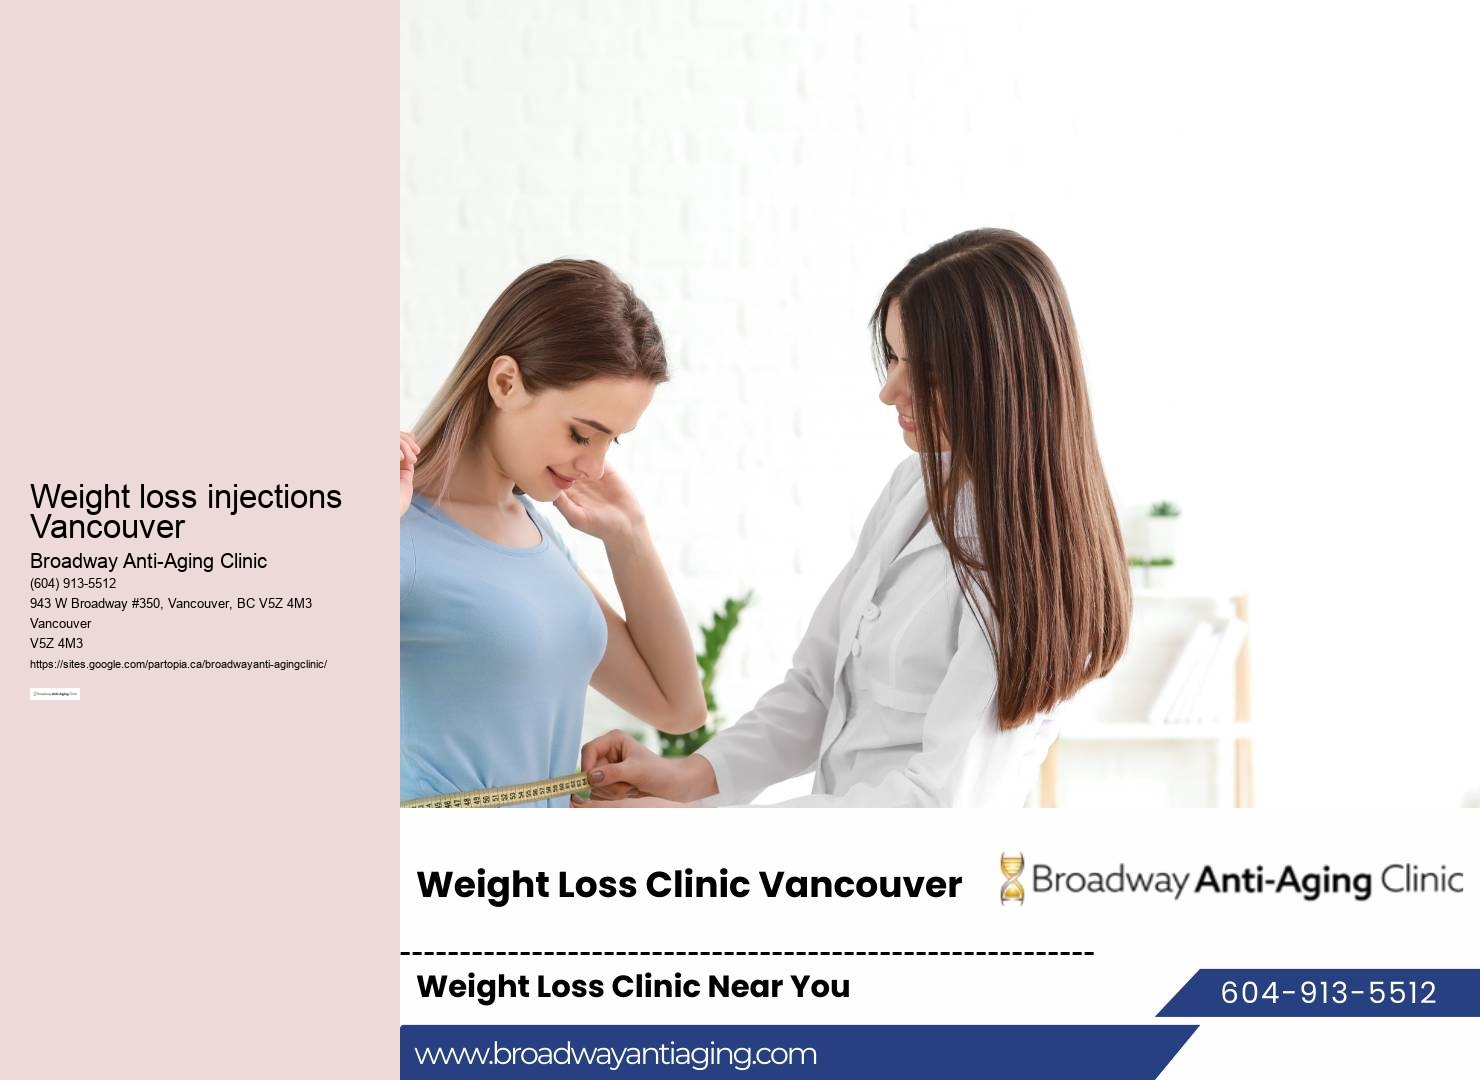 Weight loss injections Vancouver